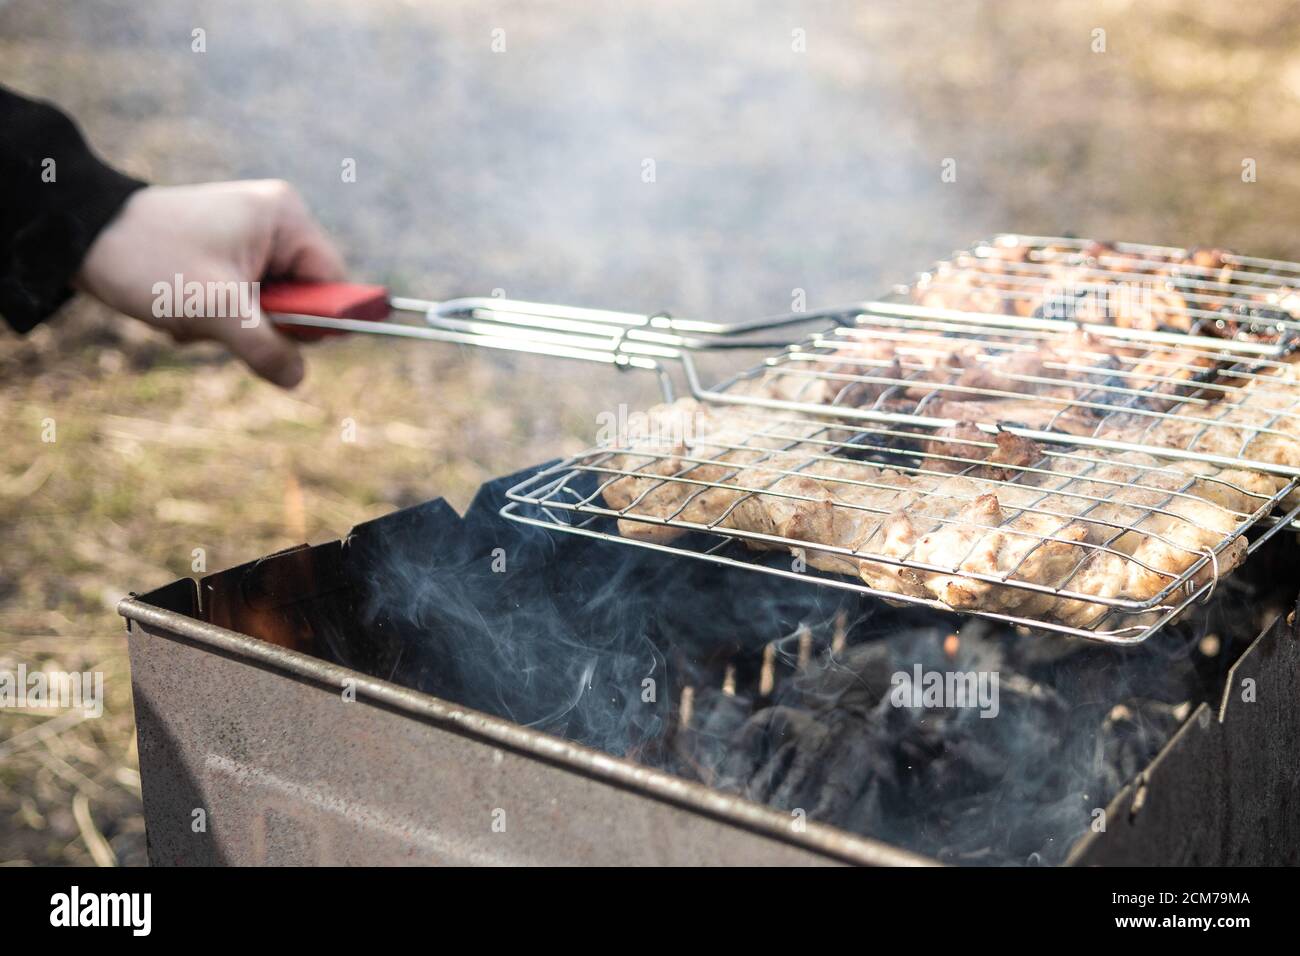 Chicken shashlik roasted over charcoal on grill. Chicken Wings On Grill Stock Photo